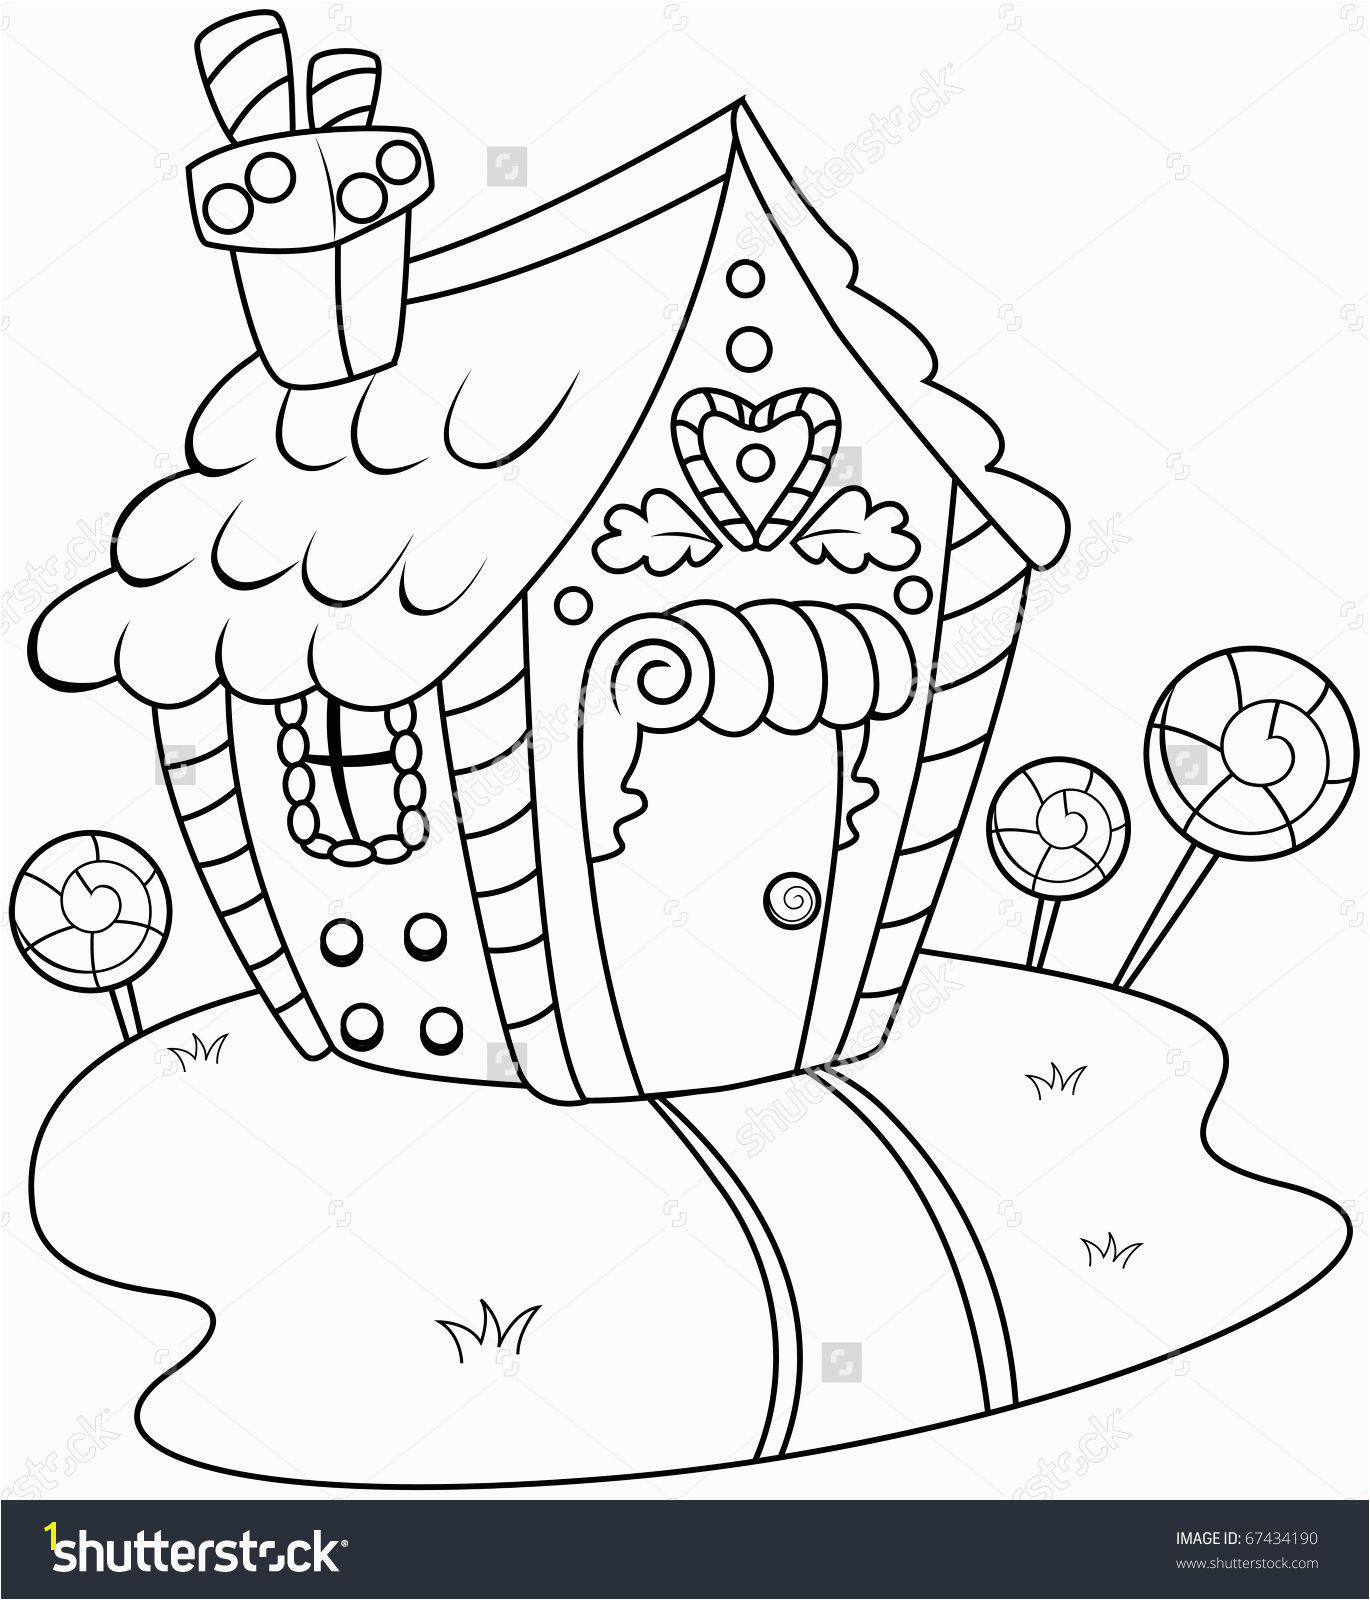 Hansel and Gretel Candy House Coloring Page